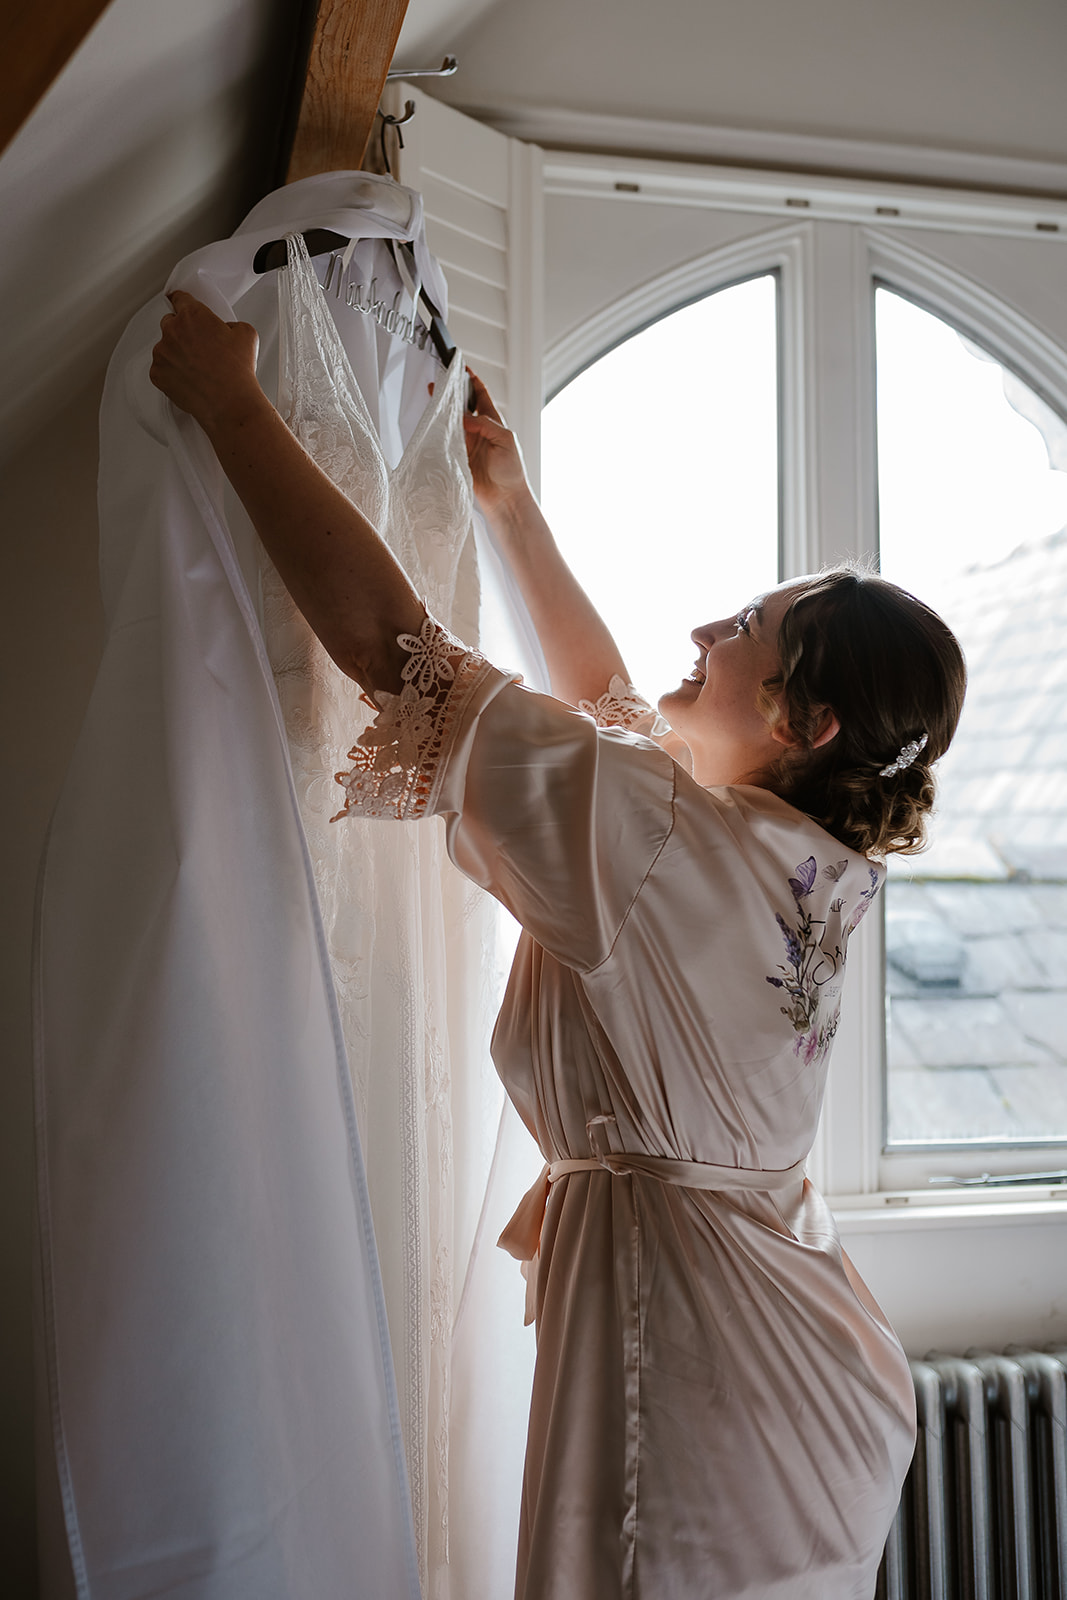 Bride unwrapping dress on hanger by window